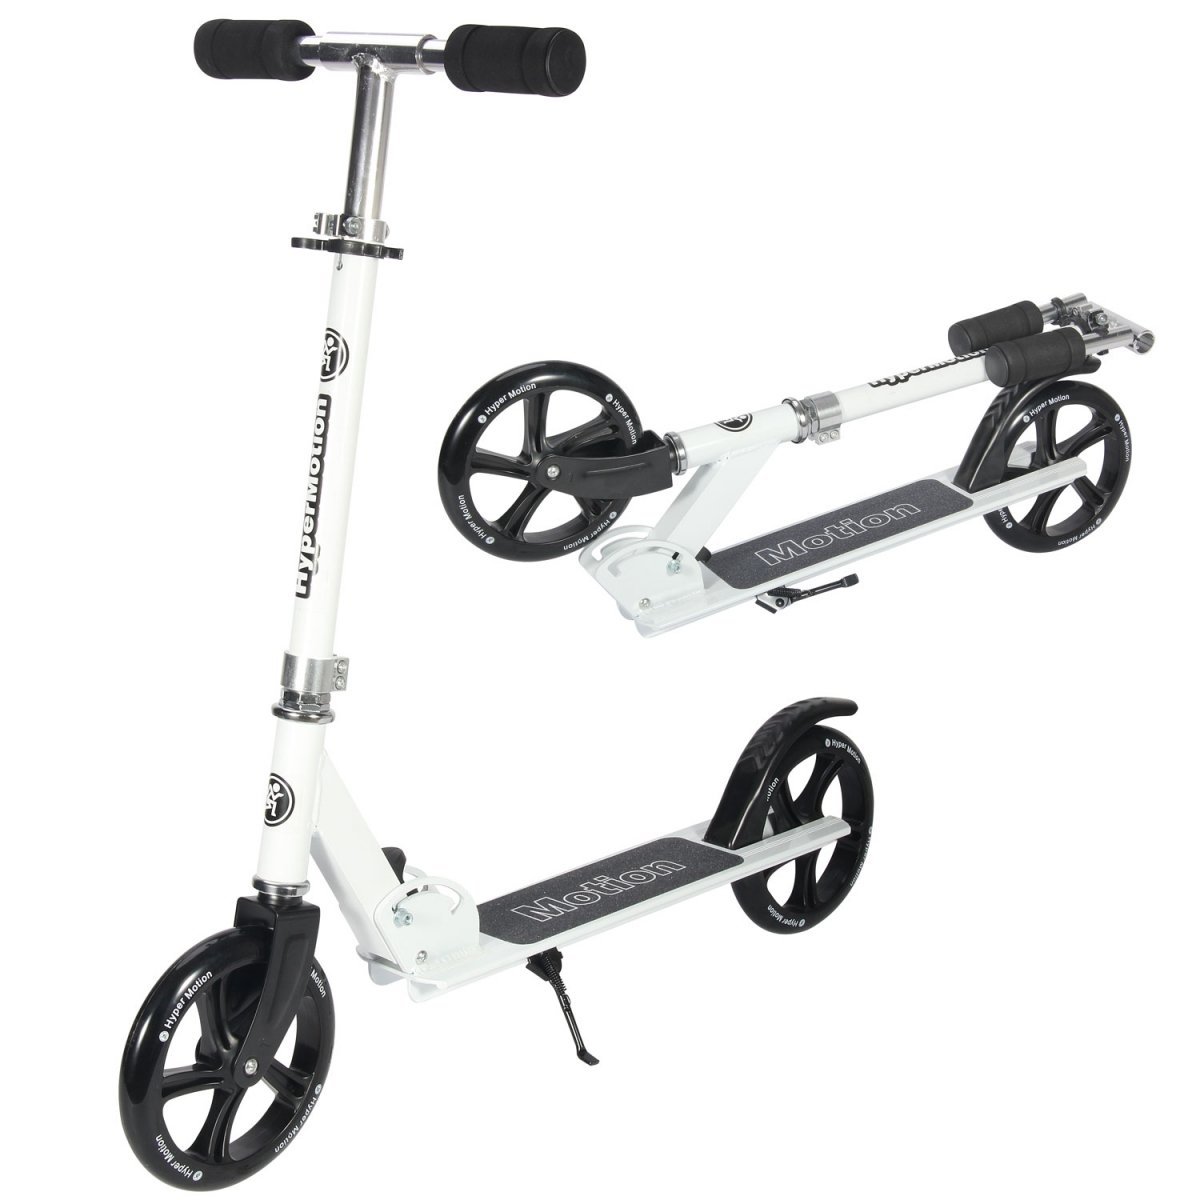 ROCKSTER scooter